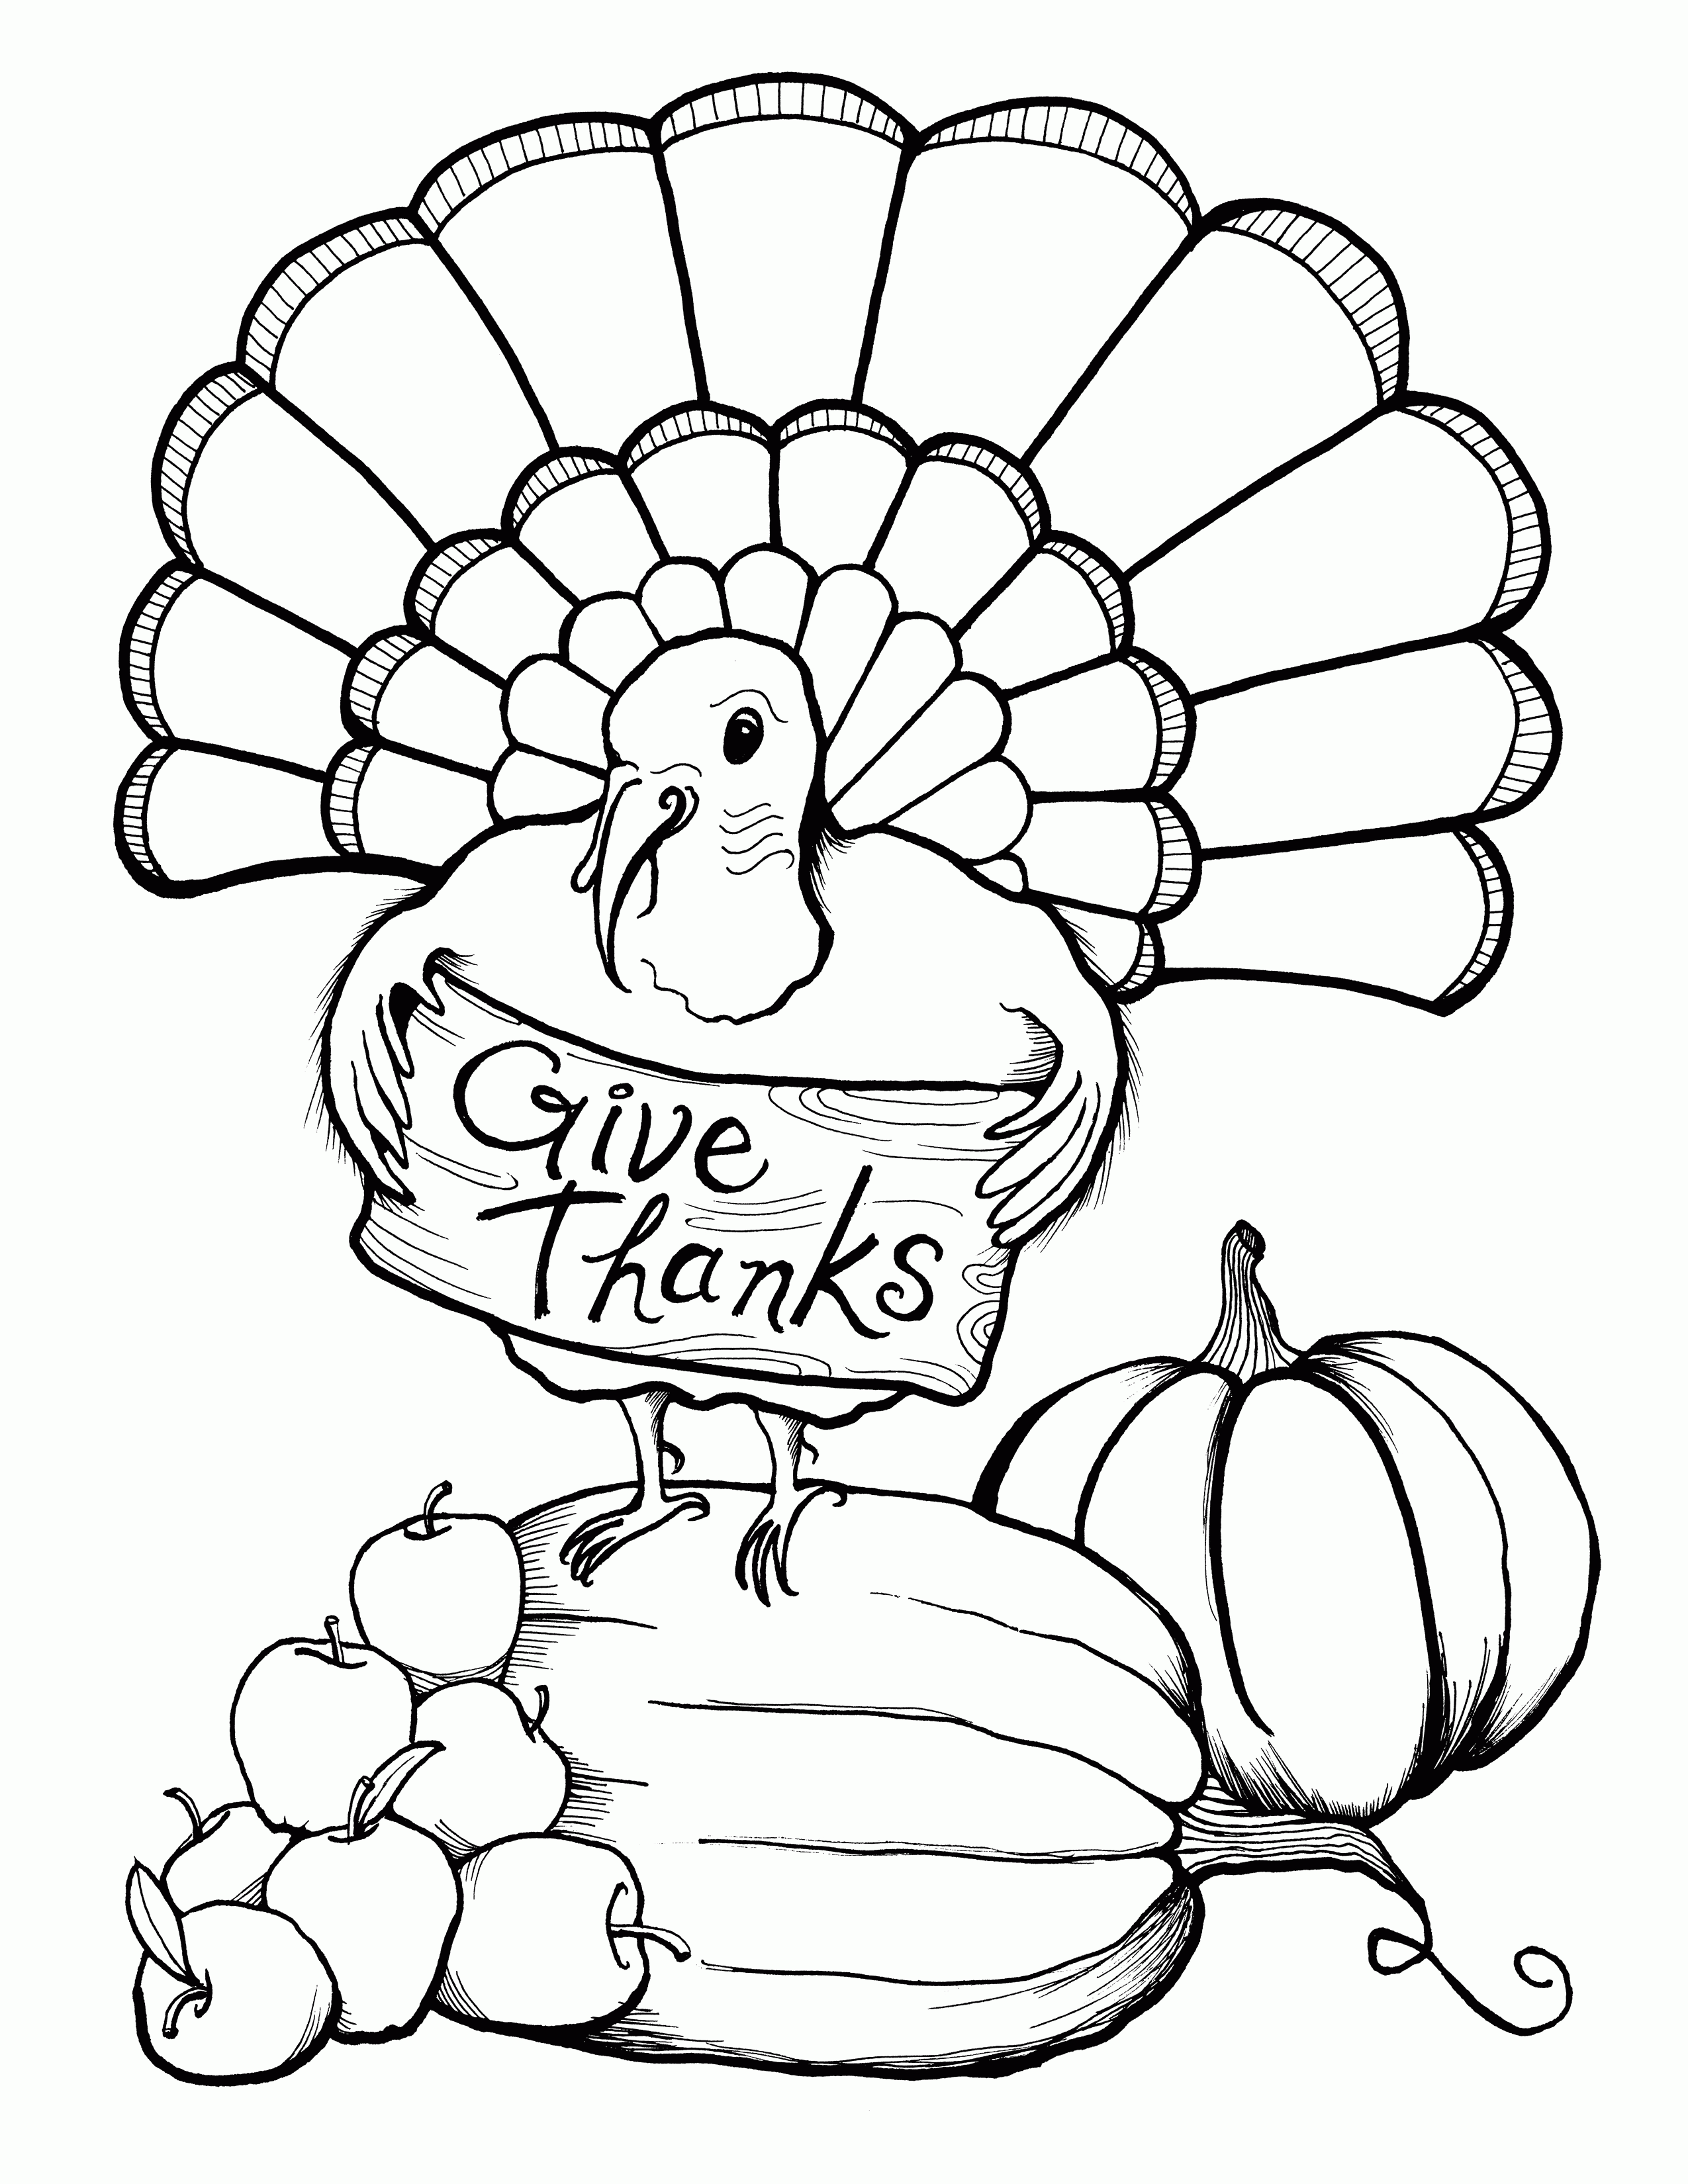 Thanksgiving Preschool Coloring Pages   Coloring Home